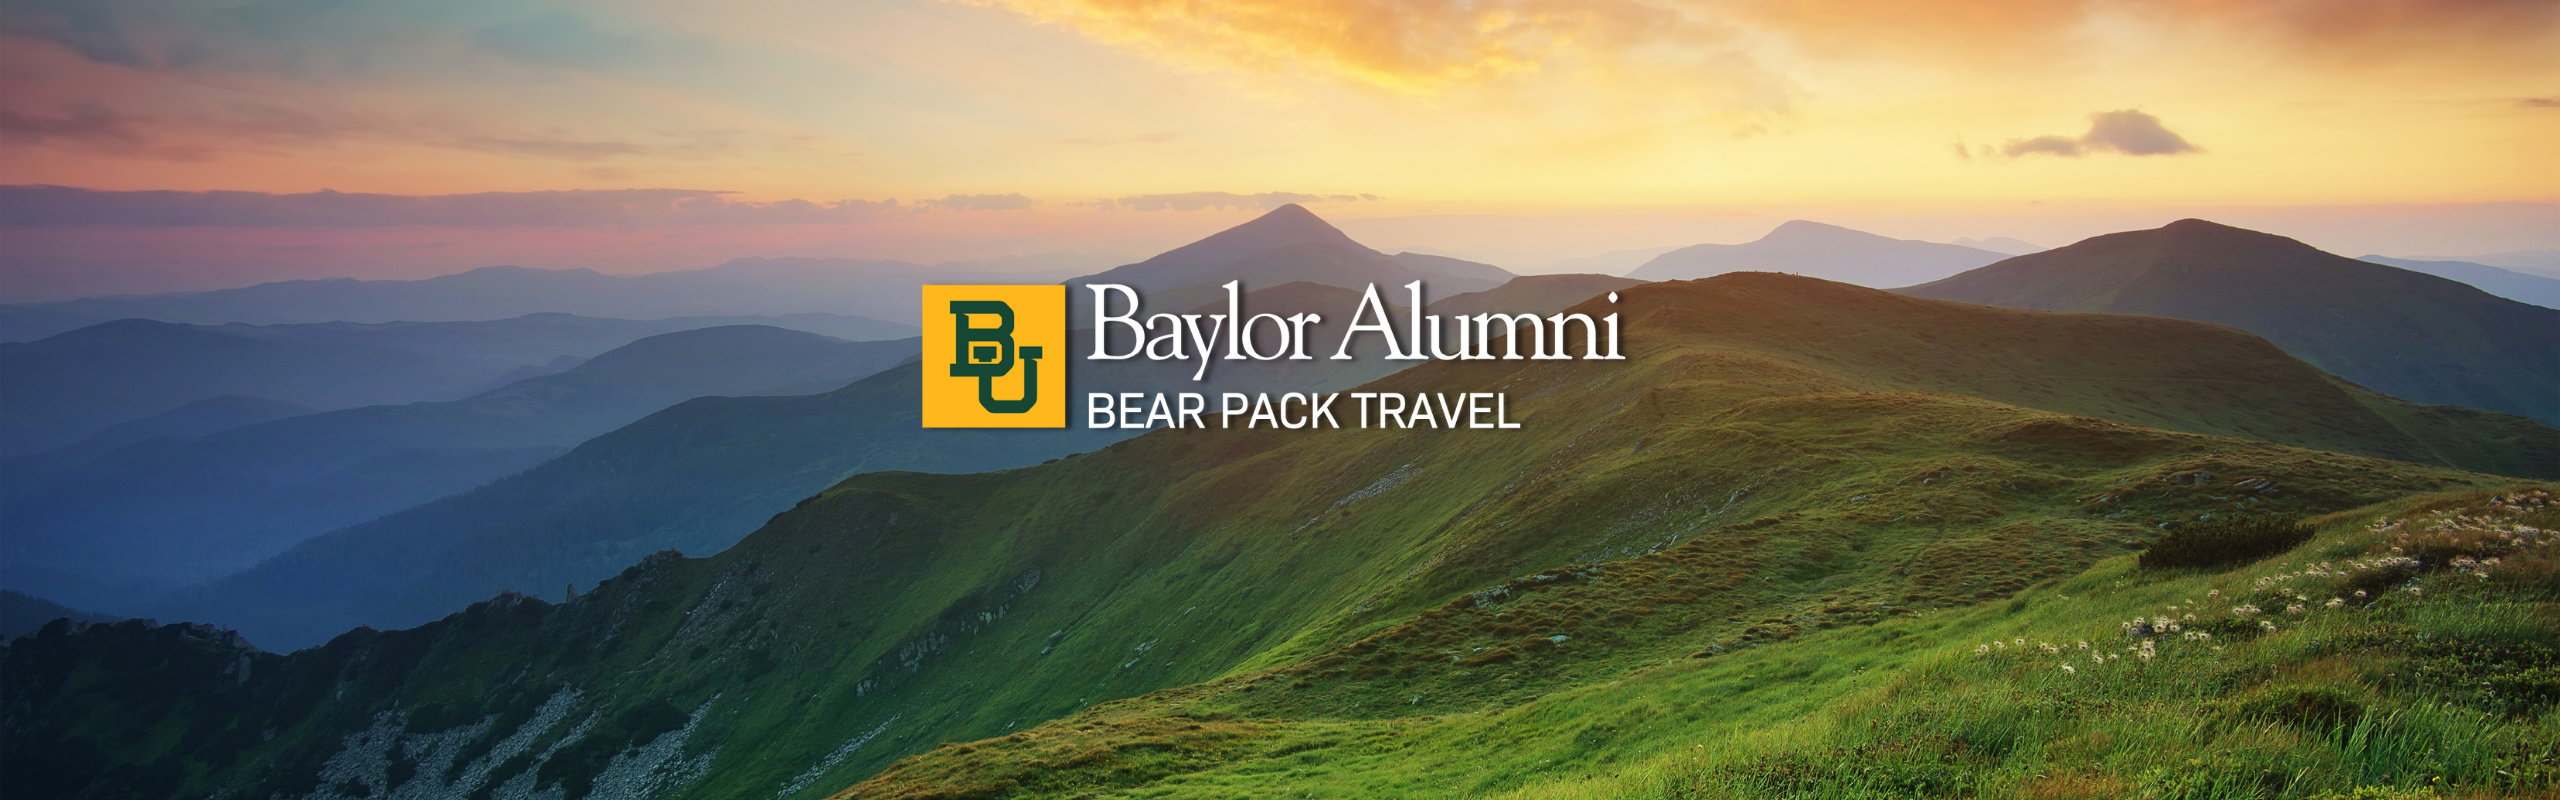 Travel with the Baylor Family